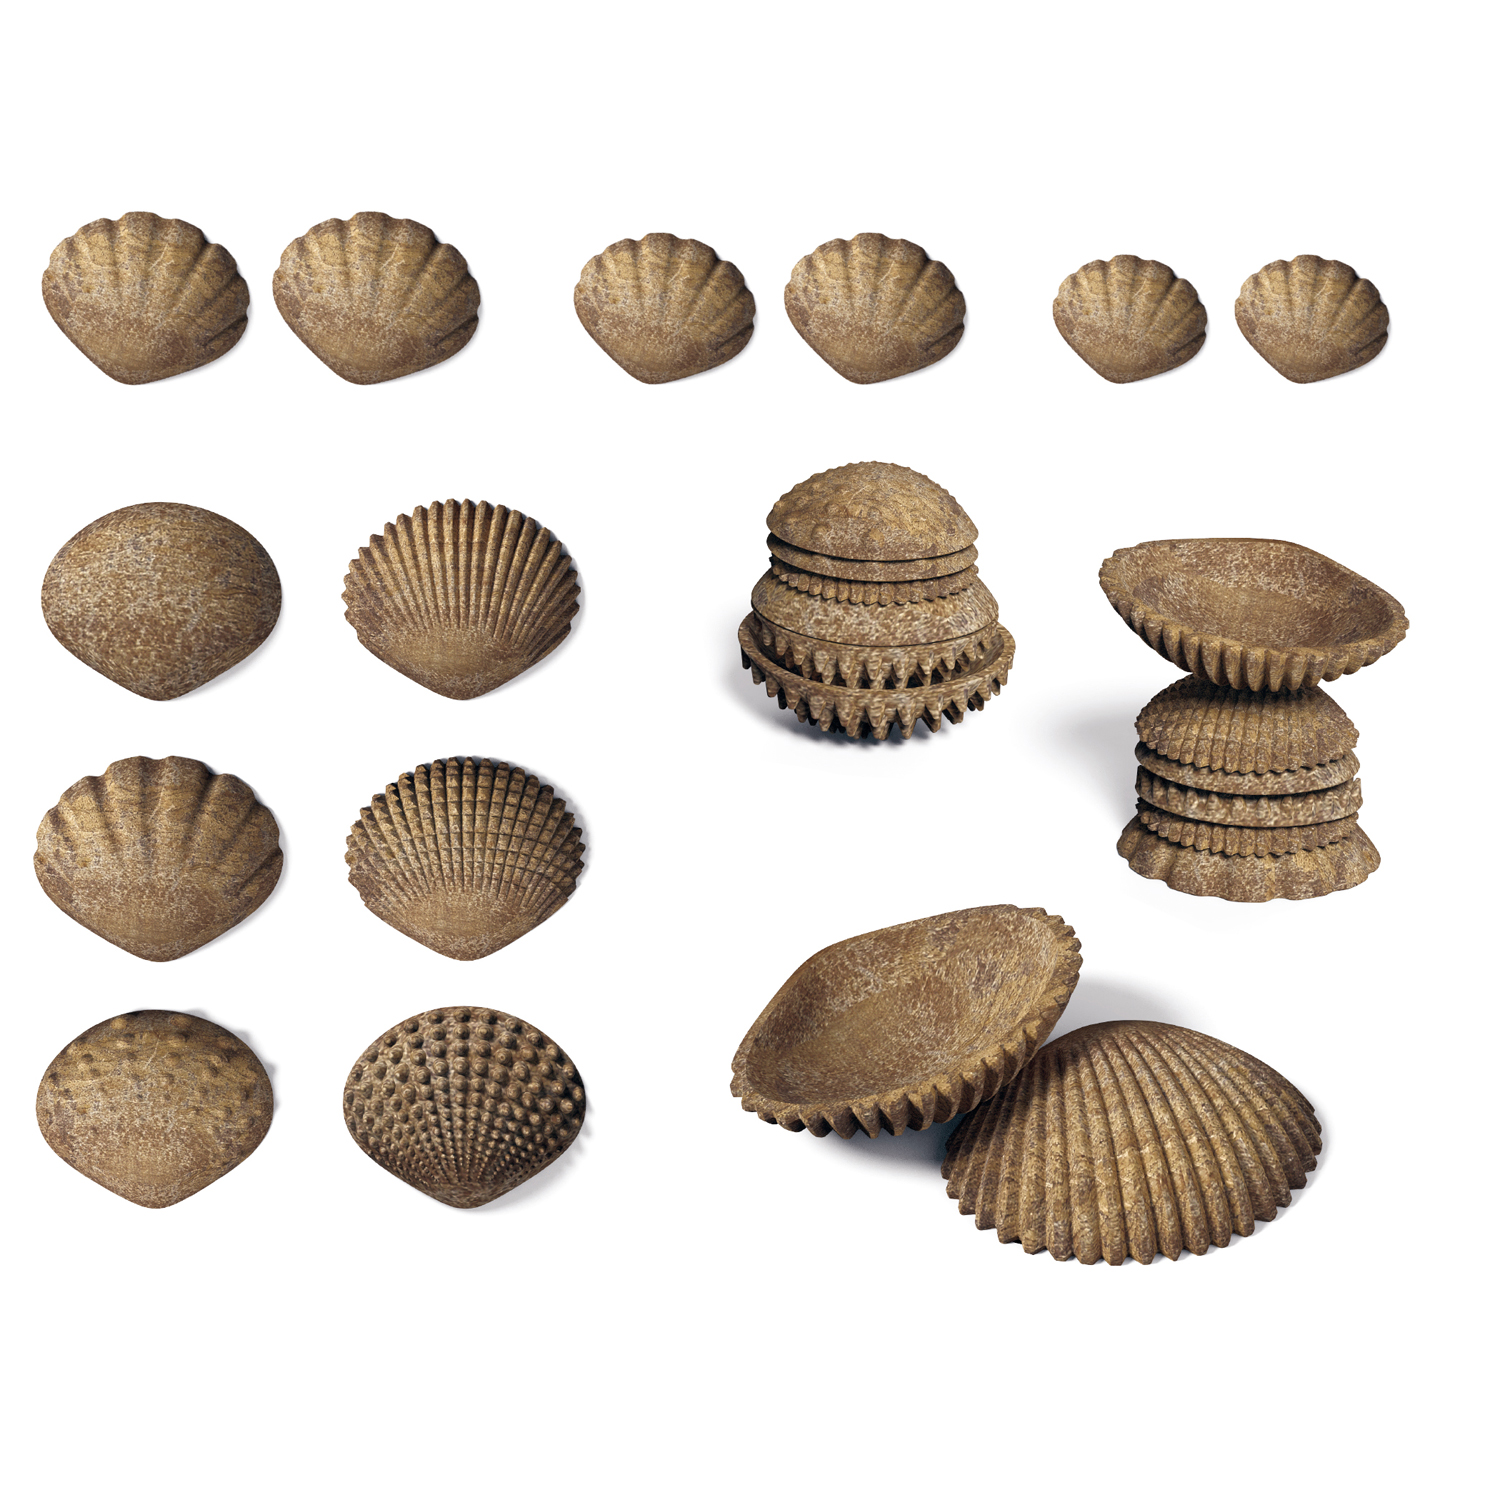 edxeducation edxeducation Tactile Shells - Eco-Friendly - 36 Pieces, 6 Textures, 3 Sizes - Ages 18m+